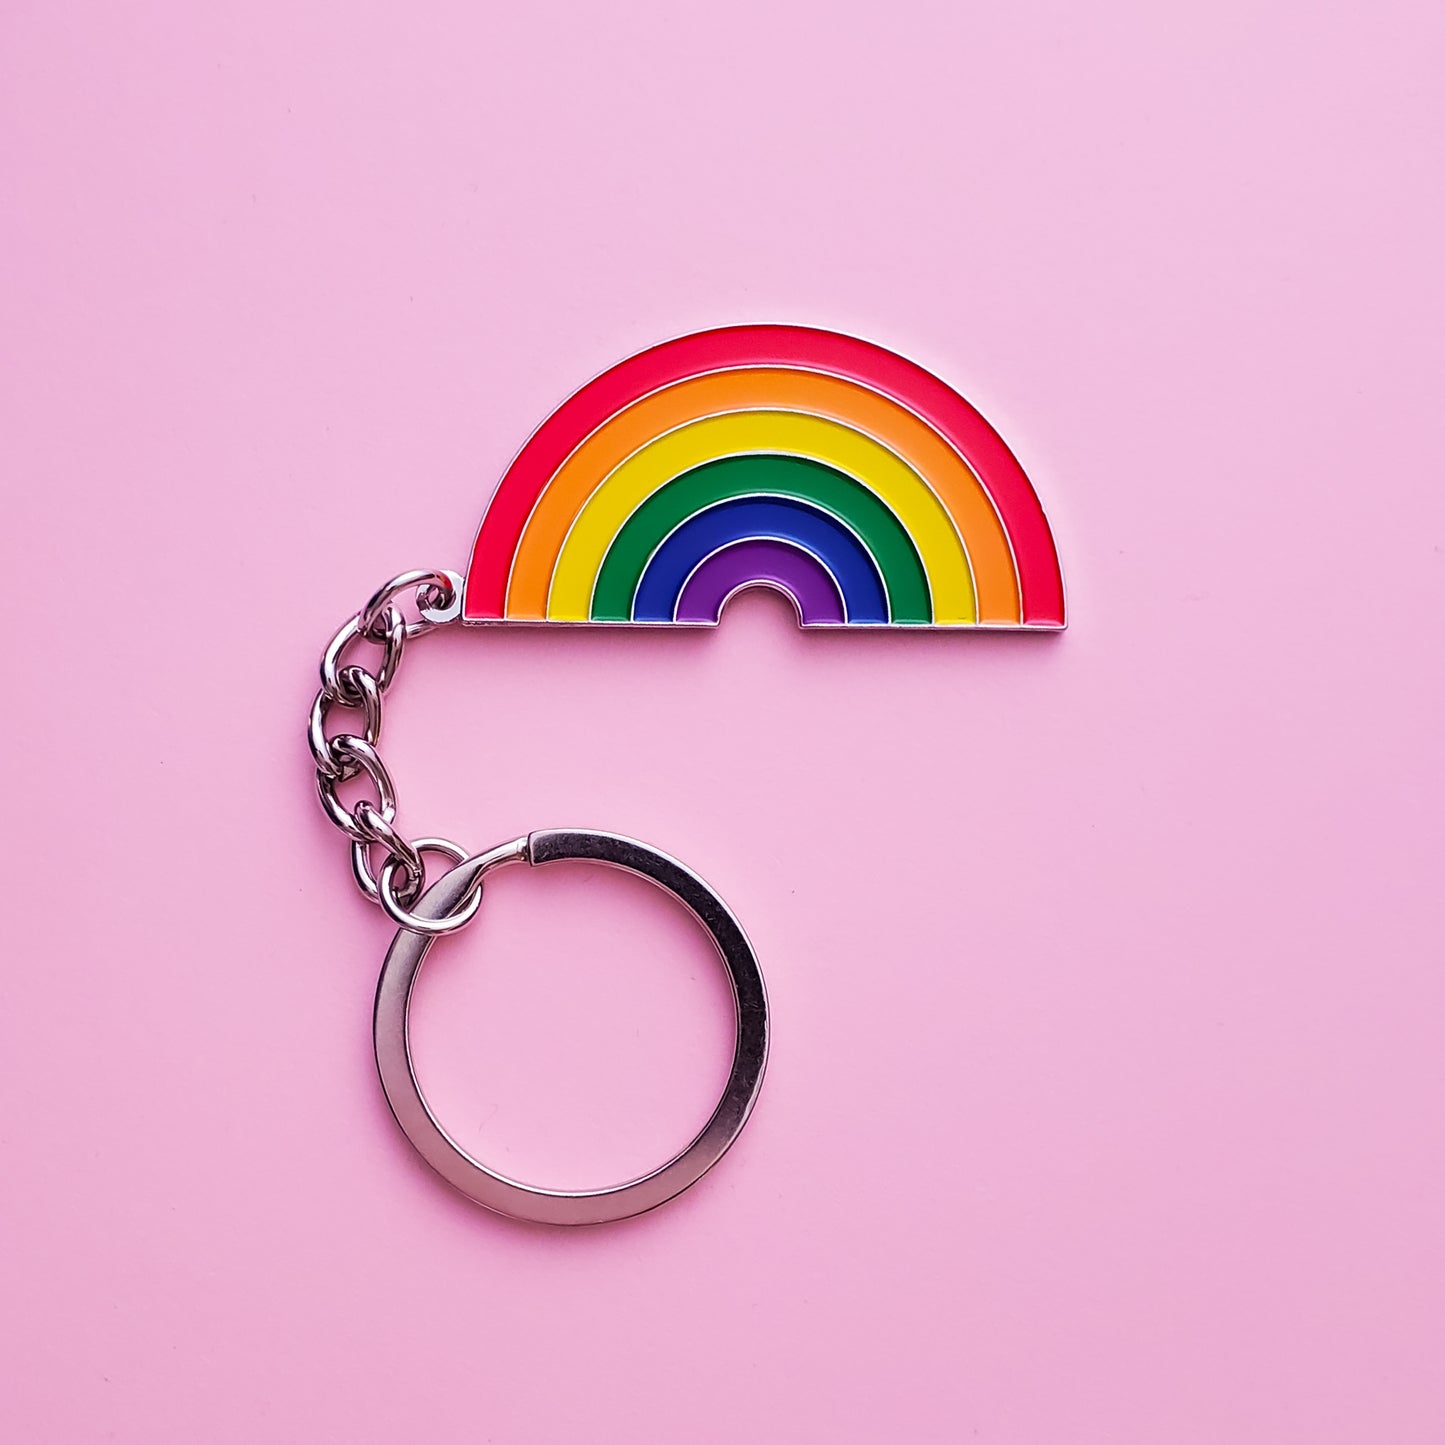 A rainbow keychain set on a pink background. This LGBTQ keychain is has vibrant rainbow pride colours set in a polished silver metal. Gay pride keychain colours are red, orange,  yellow, green blue and purple. Rainbow Keychain - LGBTQ Accessories | Little Rainbow Paper Co